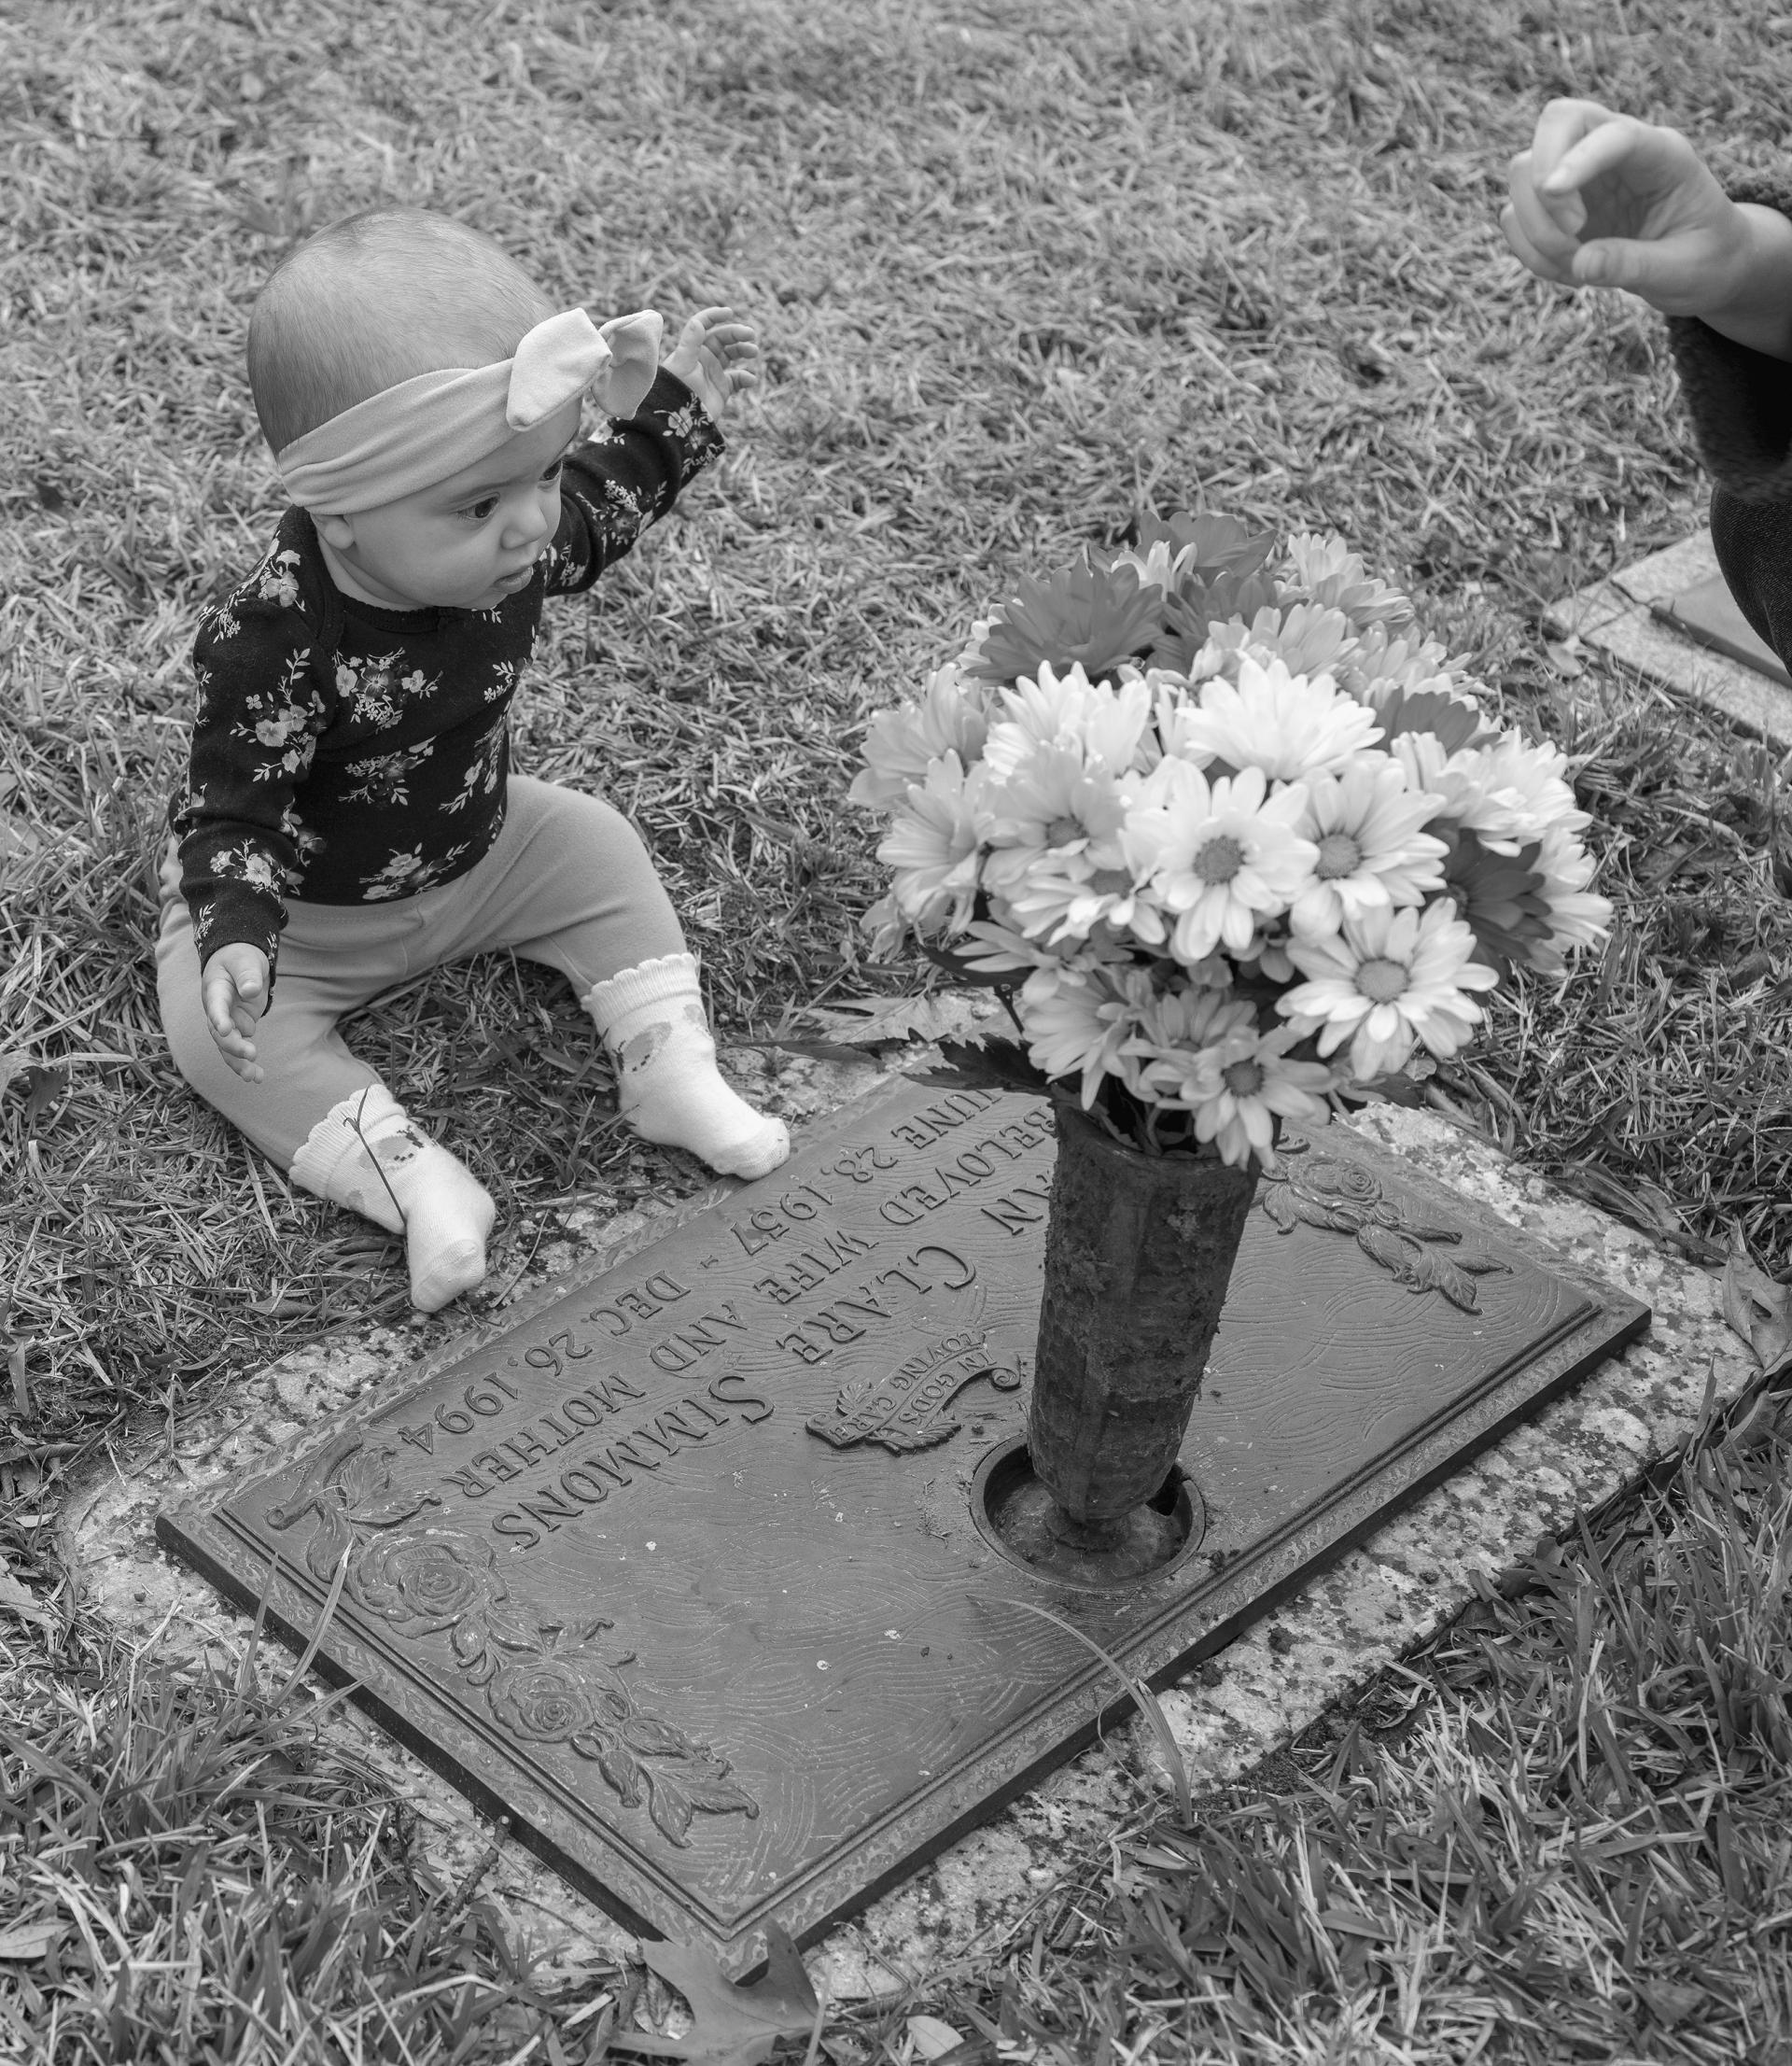 A black and white photograph of a white 6-month-old baby wearing a floral top and a bow, sitting behind a metal headstone. The headstone has a vase on top with multicolored gerbera daisies in it. A white hand is coming into the frame on the right hand side, only visible up to the wrist.